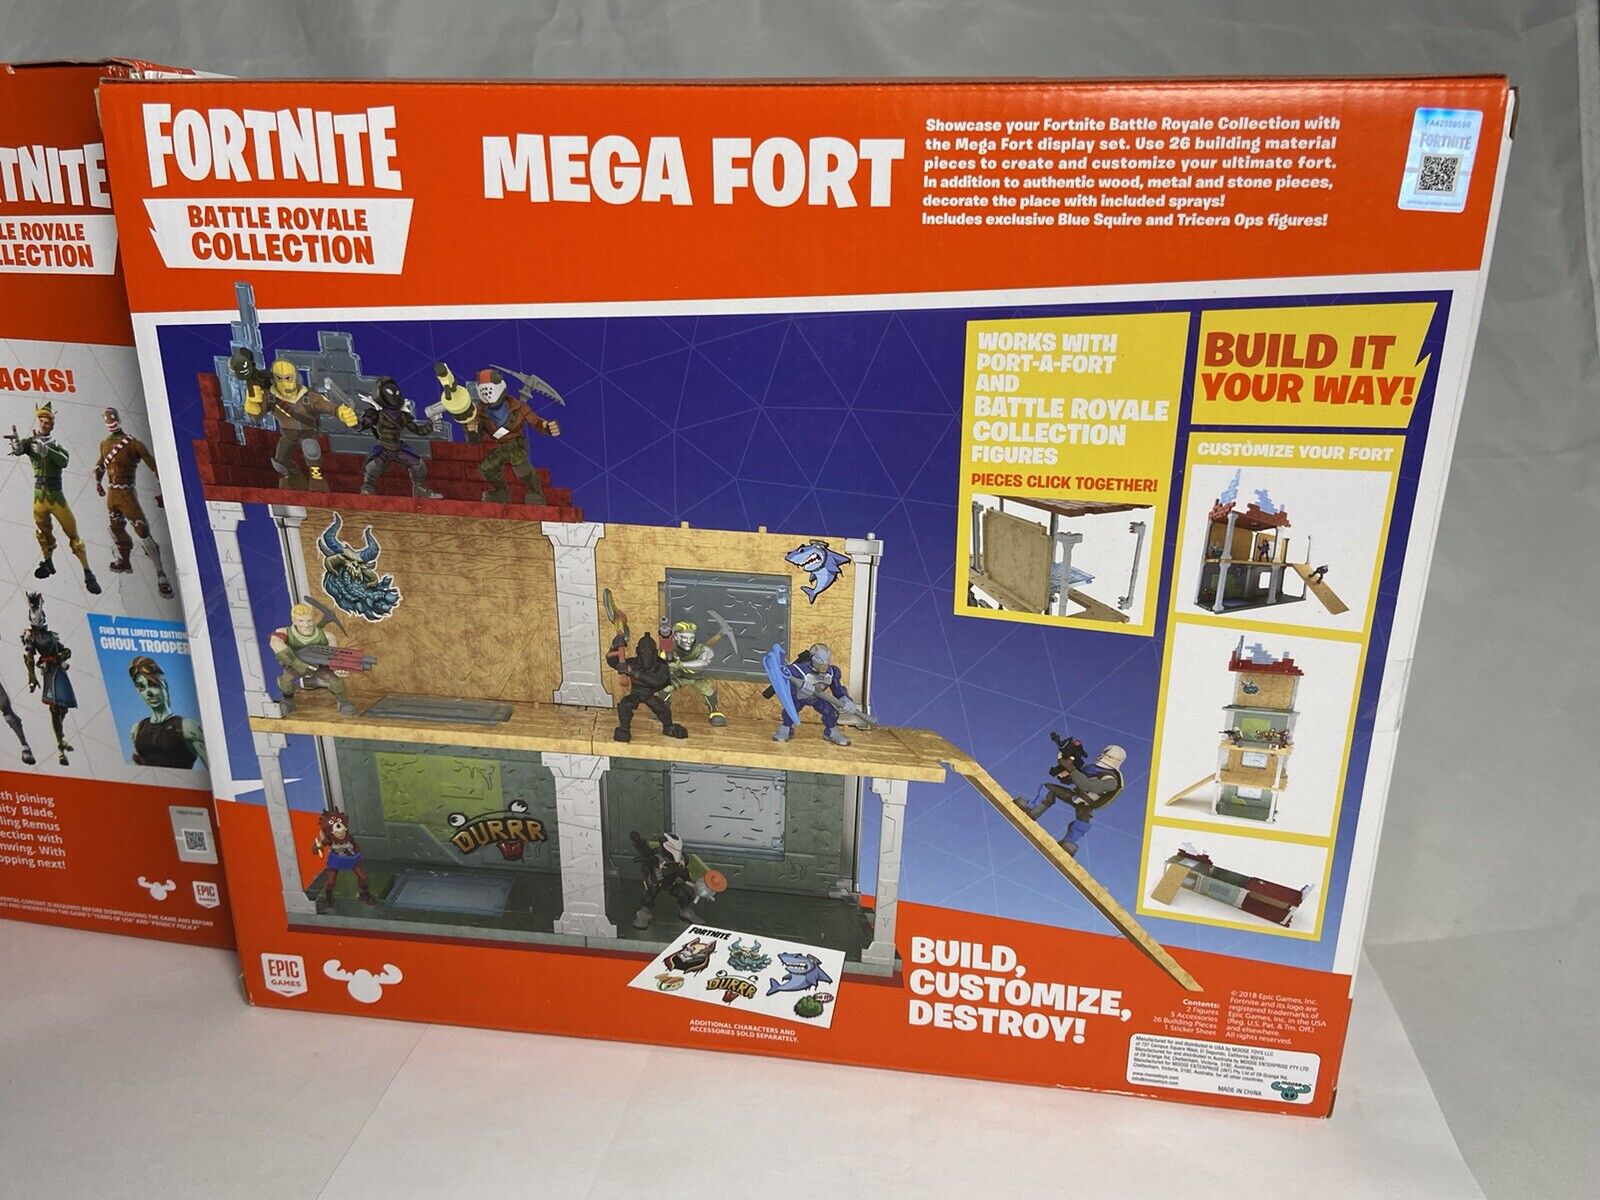 NEW FORTNITE TOYS! MEGA FORT PLAYSET UNBOXING! BUILDING 2 SETS TO